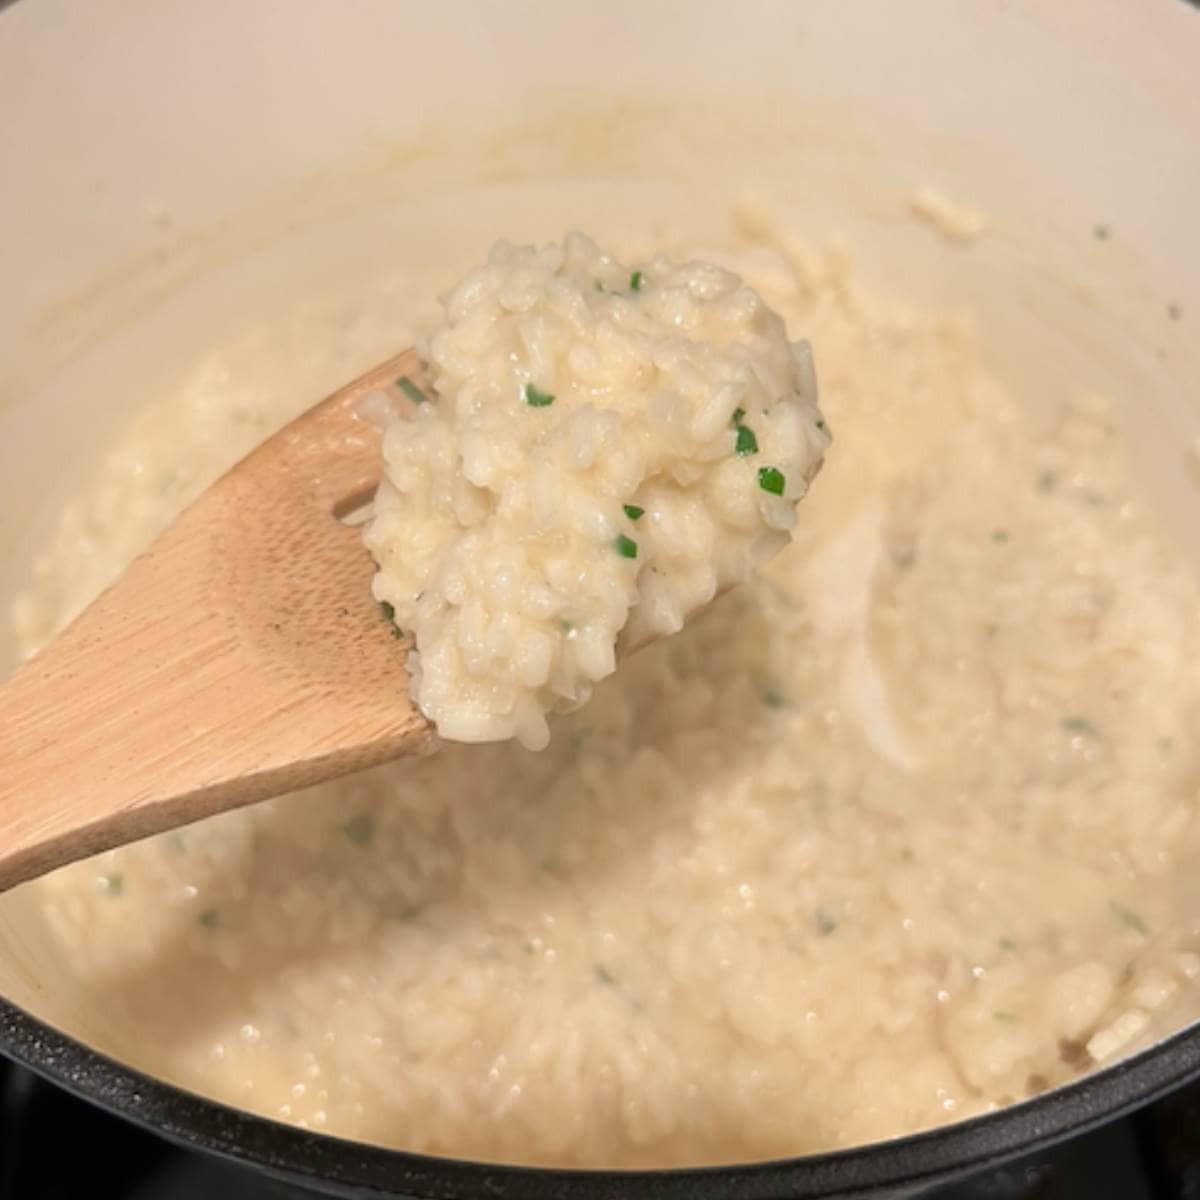 Wooden spoon showing texture of finished risotto.